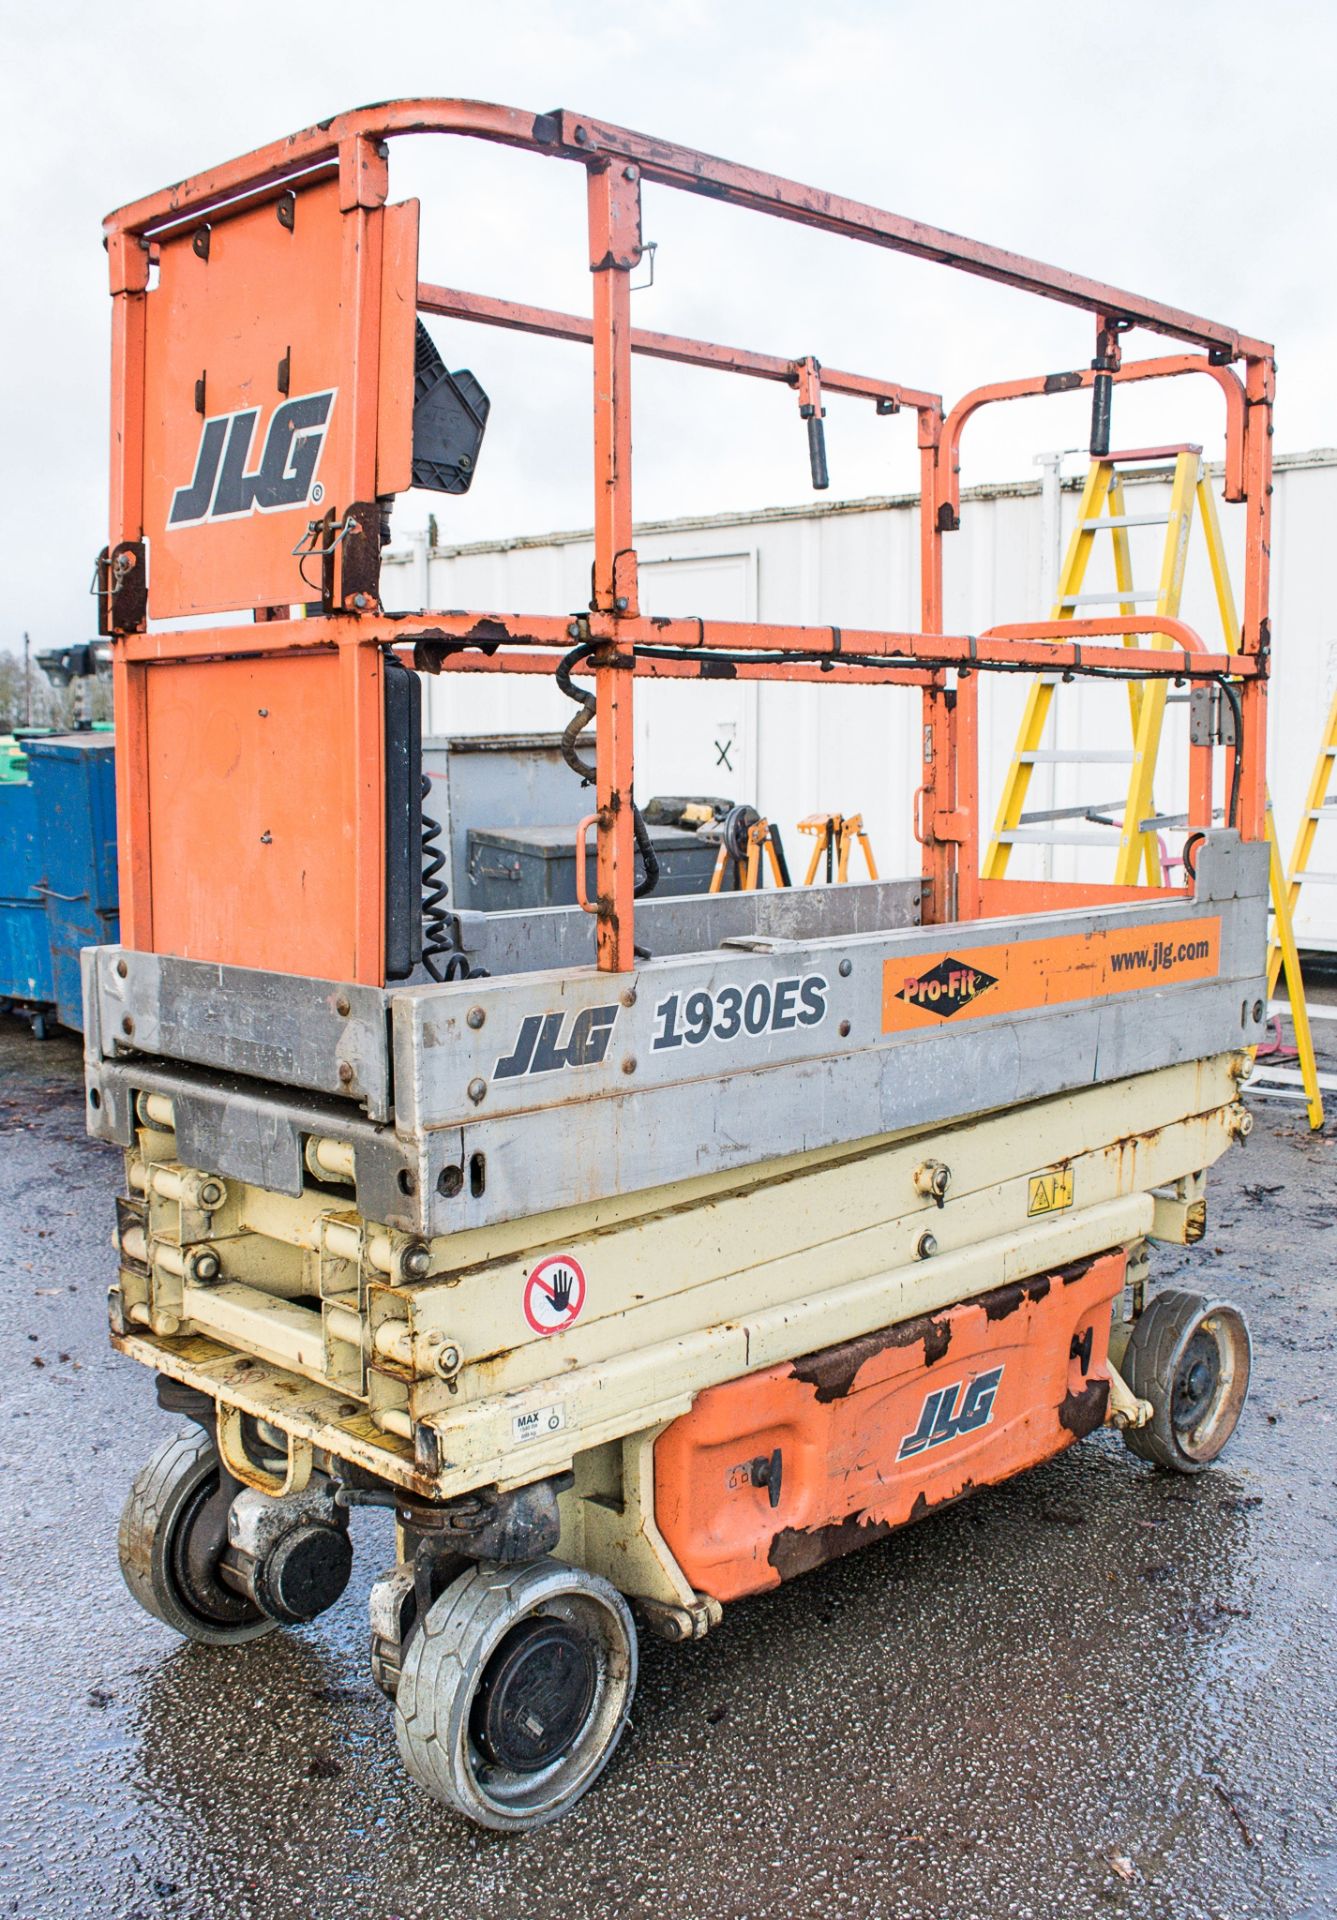 JLG 1930 ES battery electric scissor lift access platform Year: 2002 S/N: 16295 Recorded Hours: 333 - Image 3 of 6